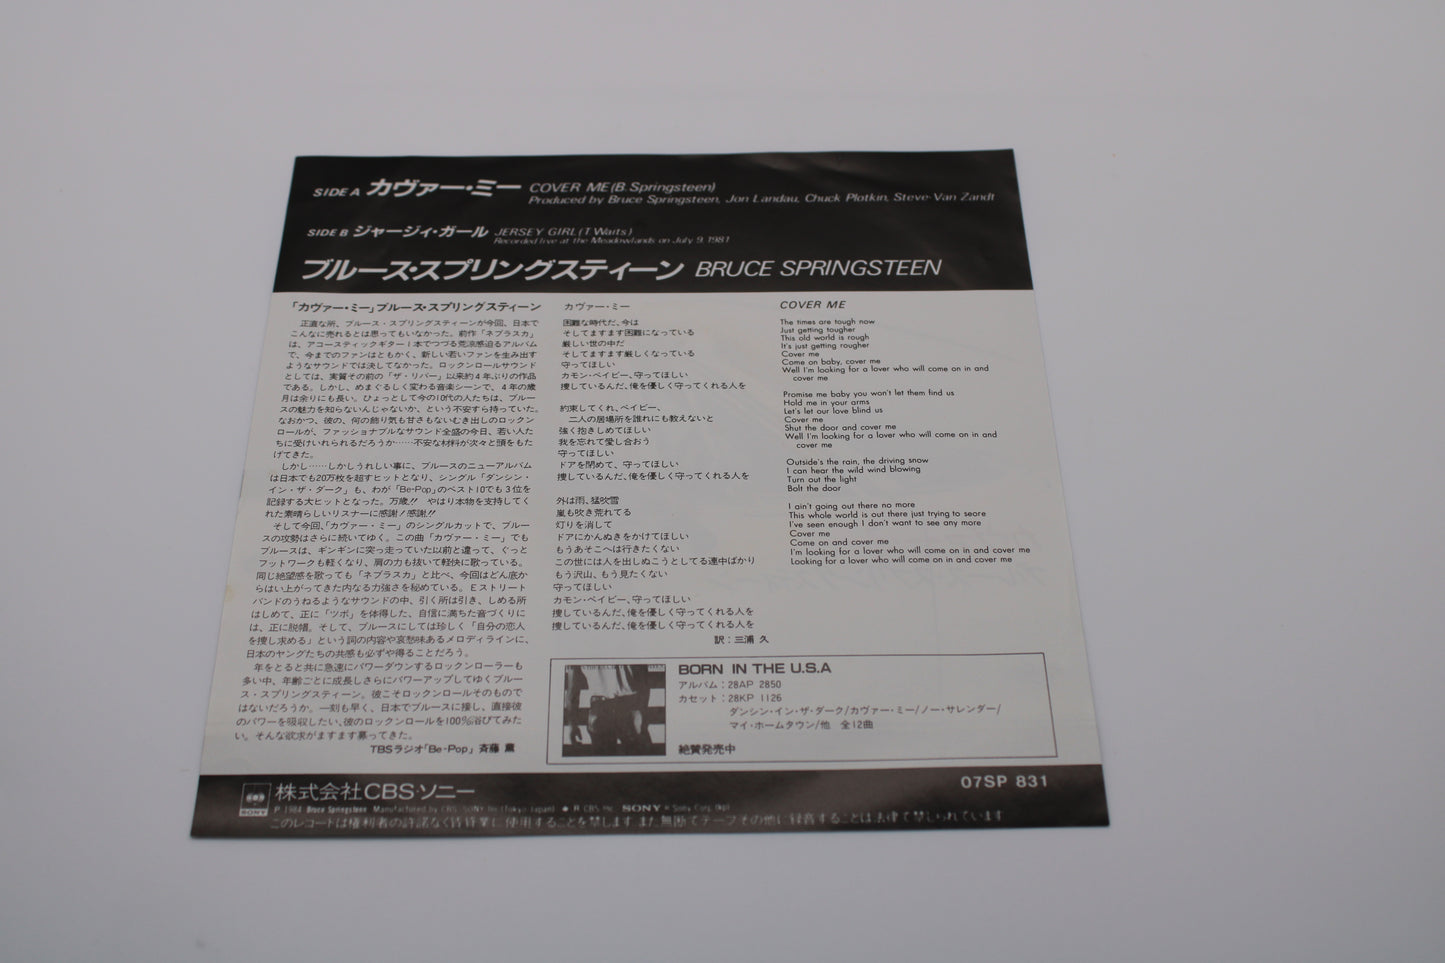 Bruce Springsteen - Cover Me & Jersey Girl - 45 Record Import Japan 1984 Near Mint